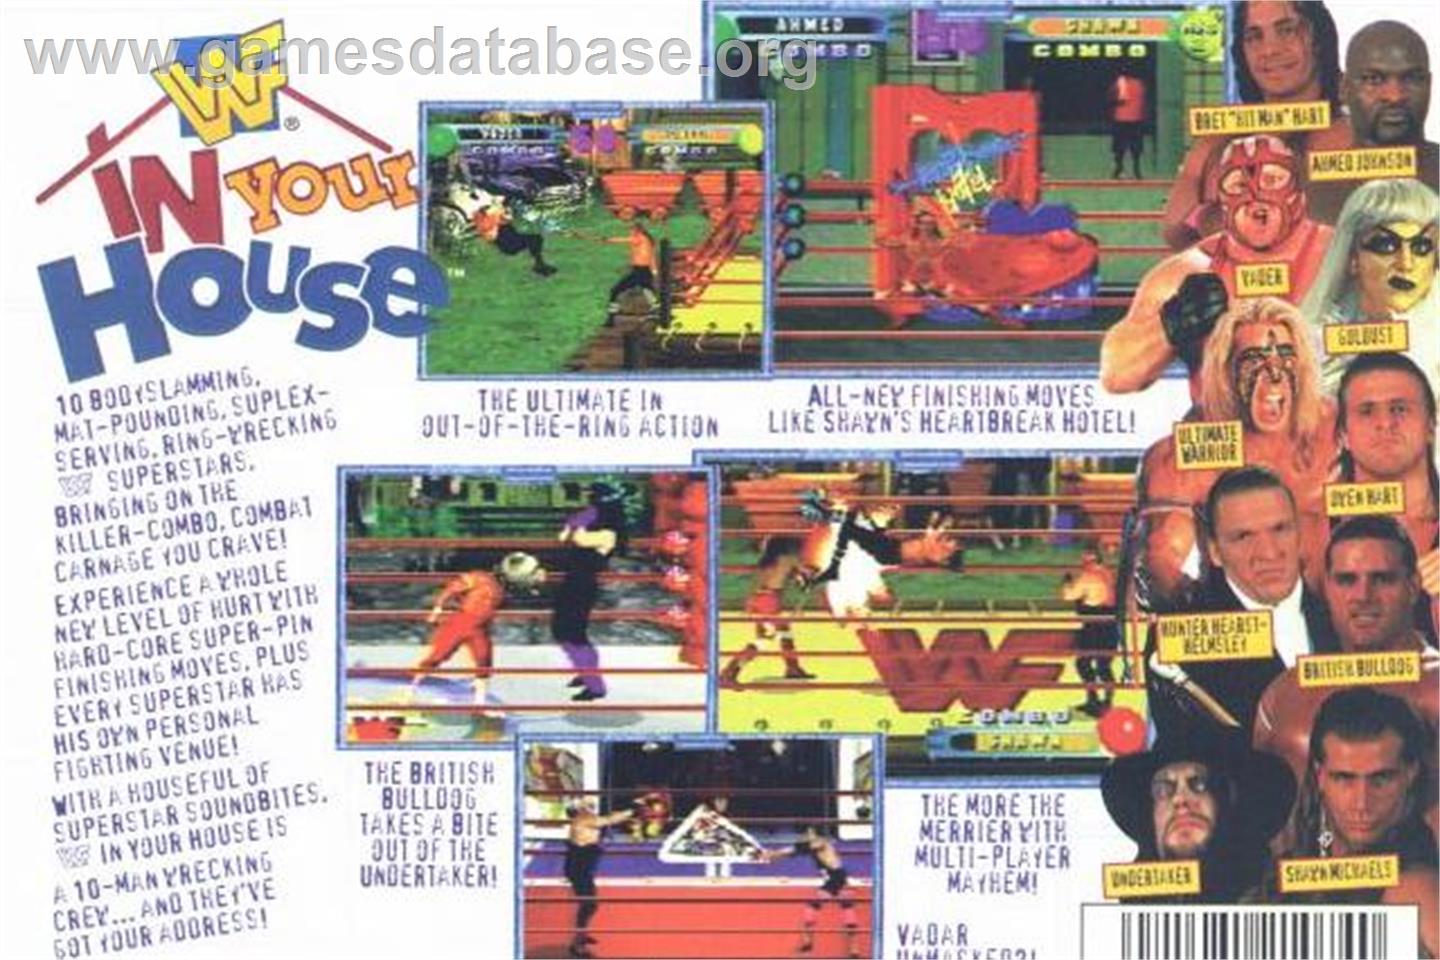 WWF in Your House - Microsoft DOS - Artwork - Box Back